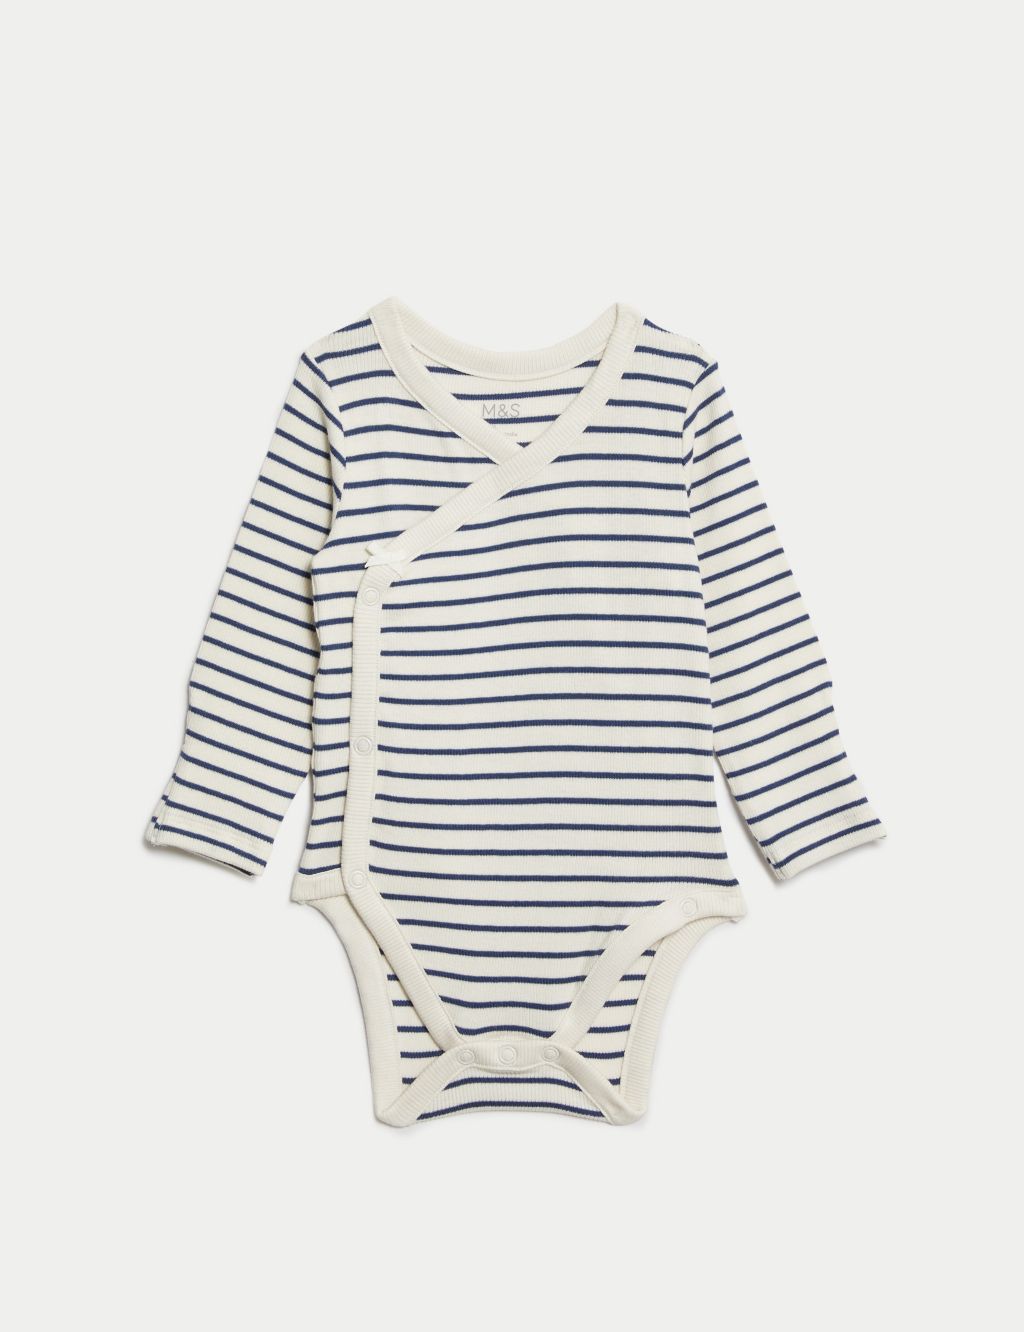 3pc Cotton Rich Striped Outfit (7lbs - 1 Yrs) image 2